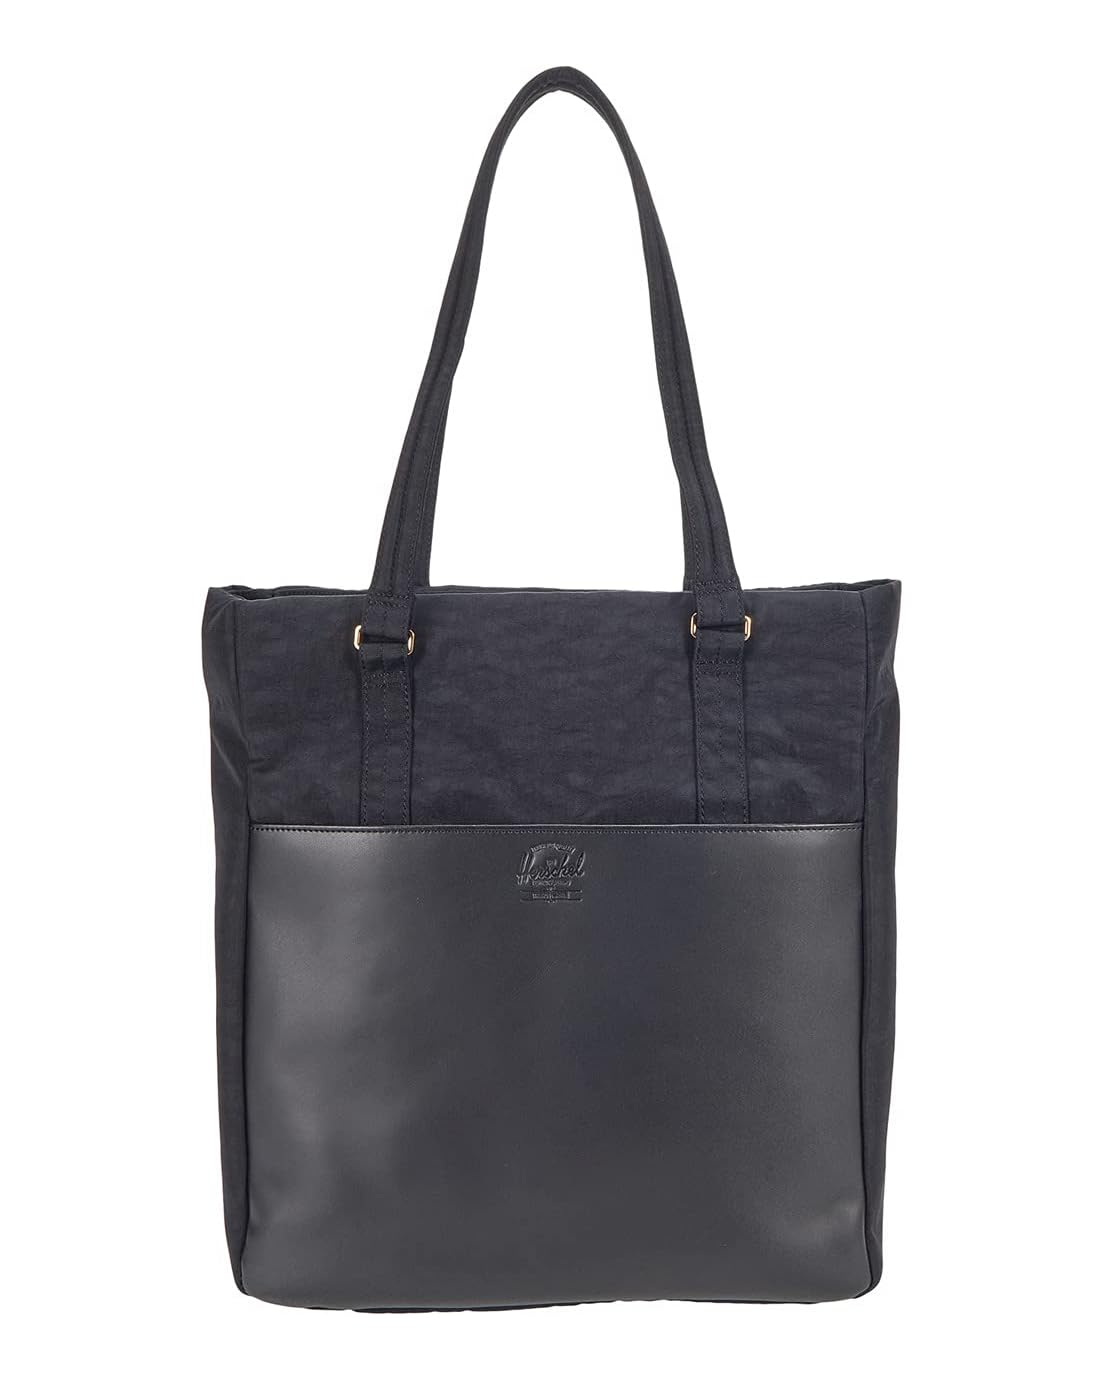 Herschel Supply Co. Orion Tote Large